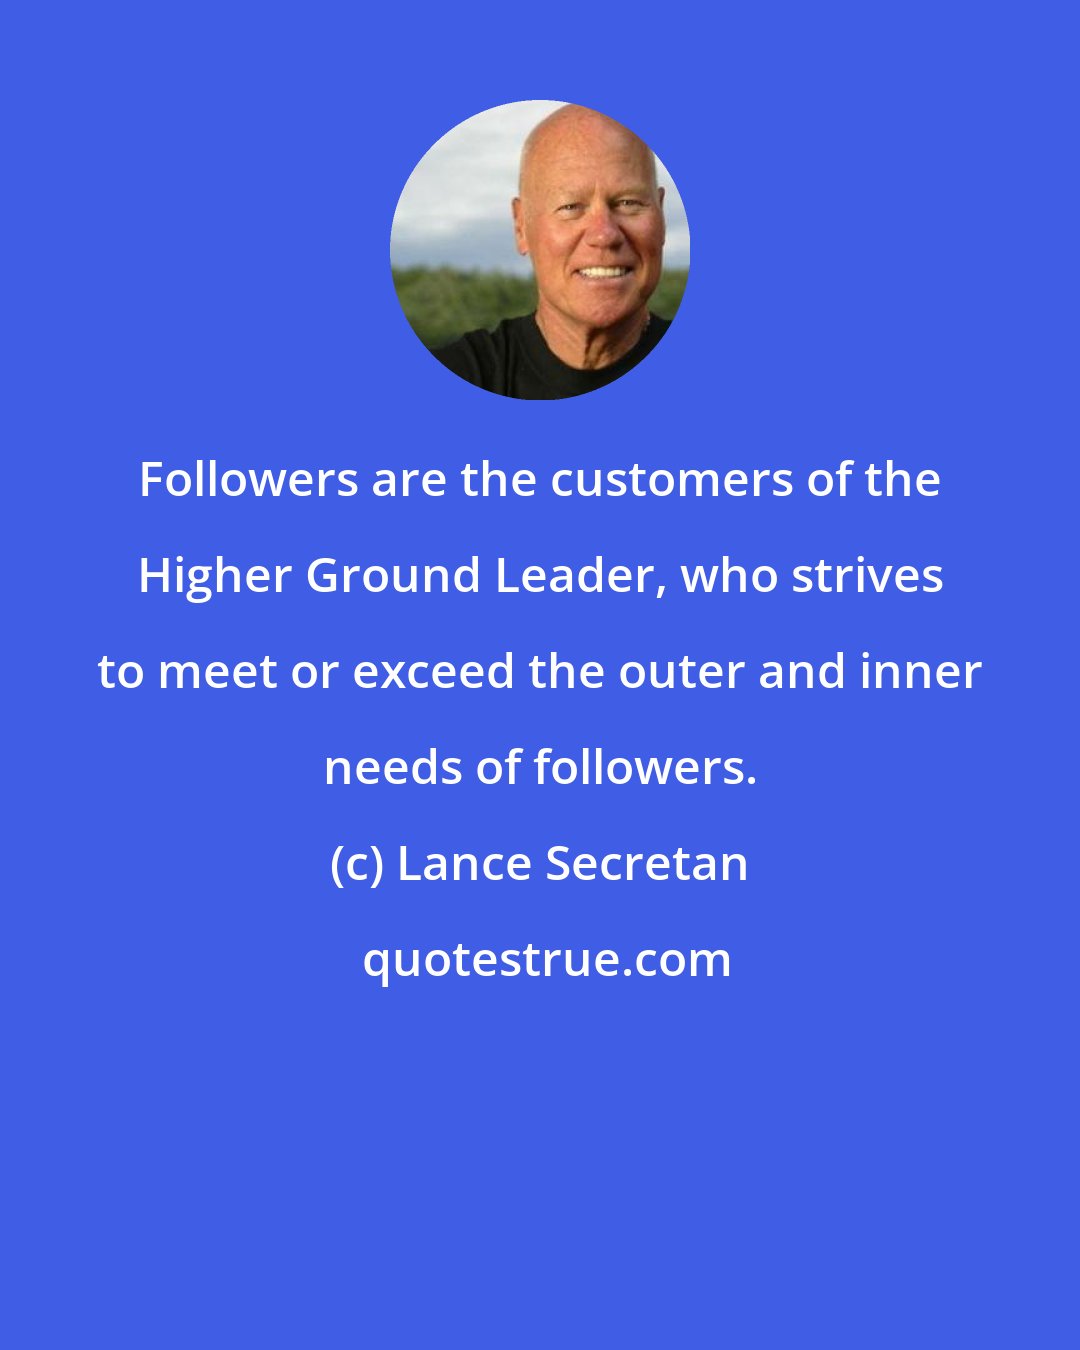 Lance Secretan: Followers are the customers of the Higher Ground Leader, who strives to meet or exceed the outer and inner needs of followers.